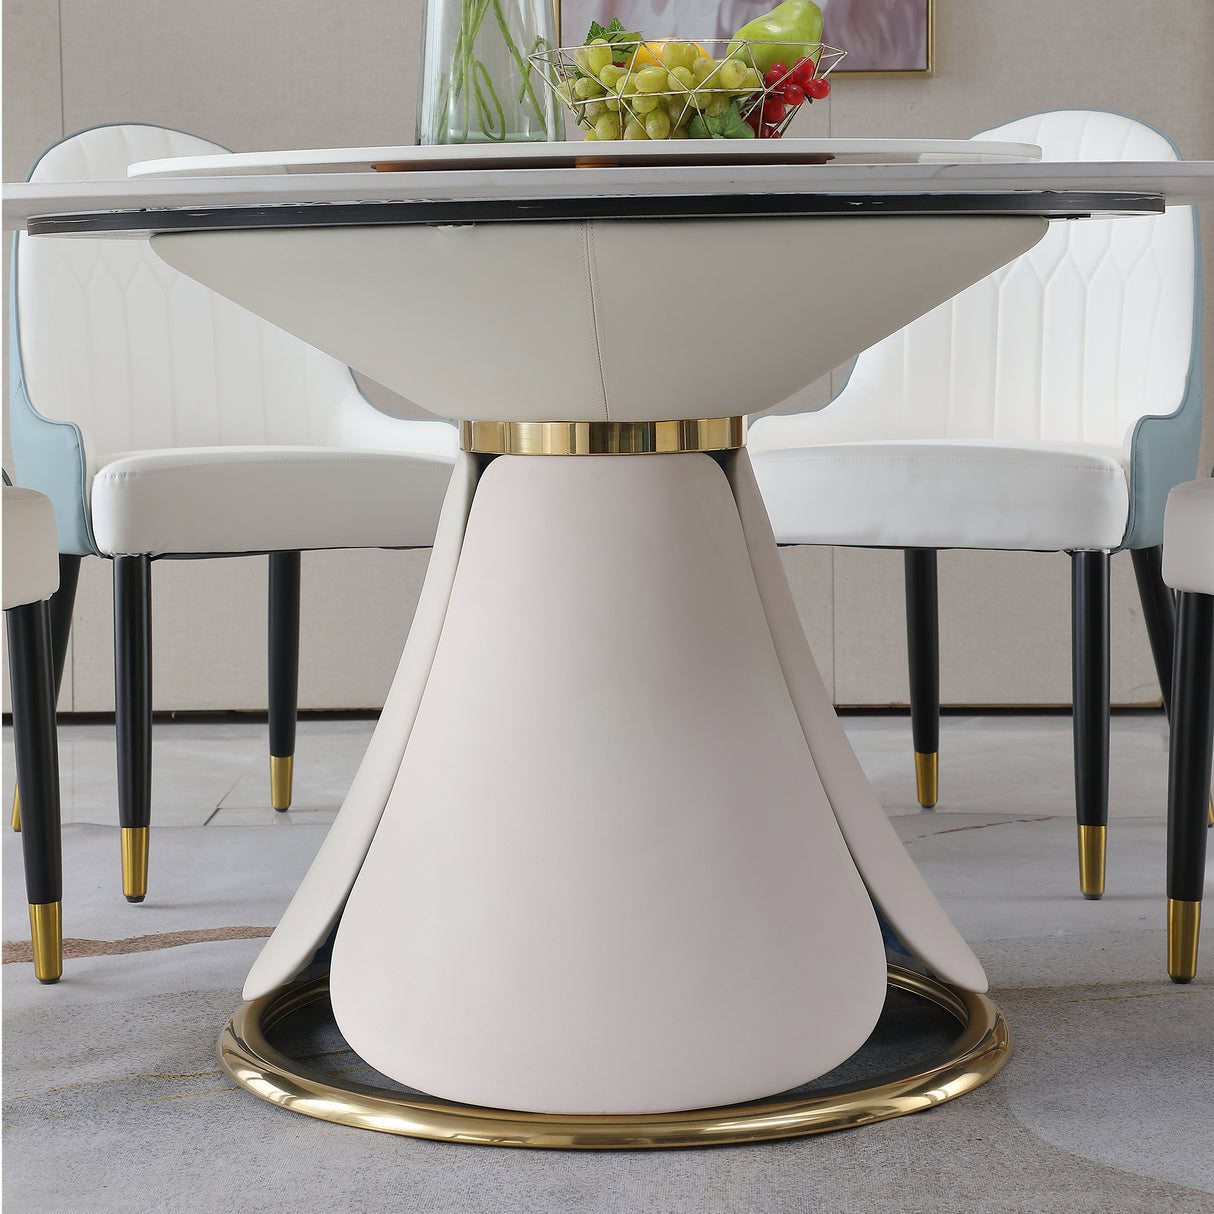 59.05"Modern Sintered stone dining table with 31.5" round turntable with wood and metal exquisite pedestal with 8 pcs Chairs . - Home Elegance USA